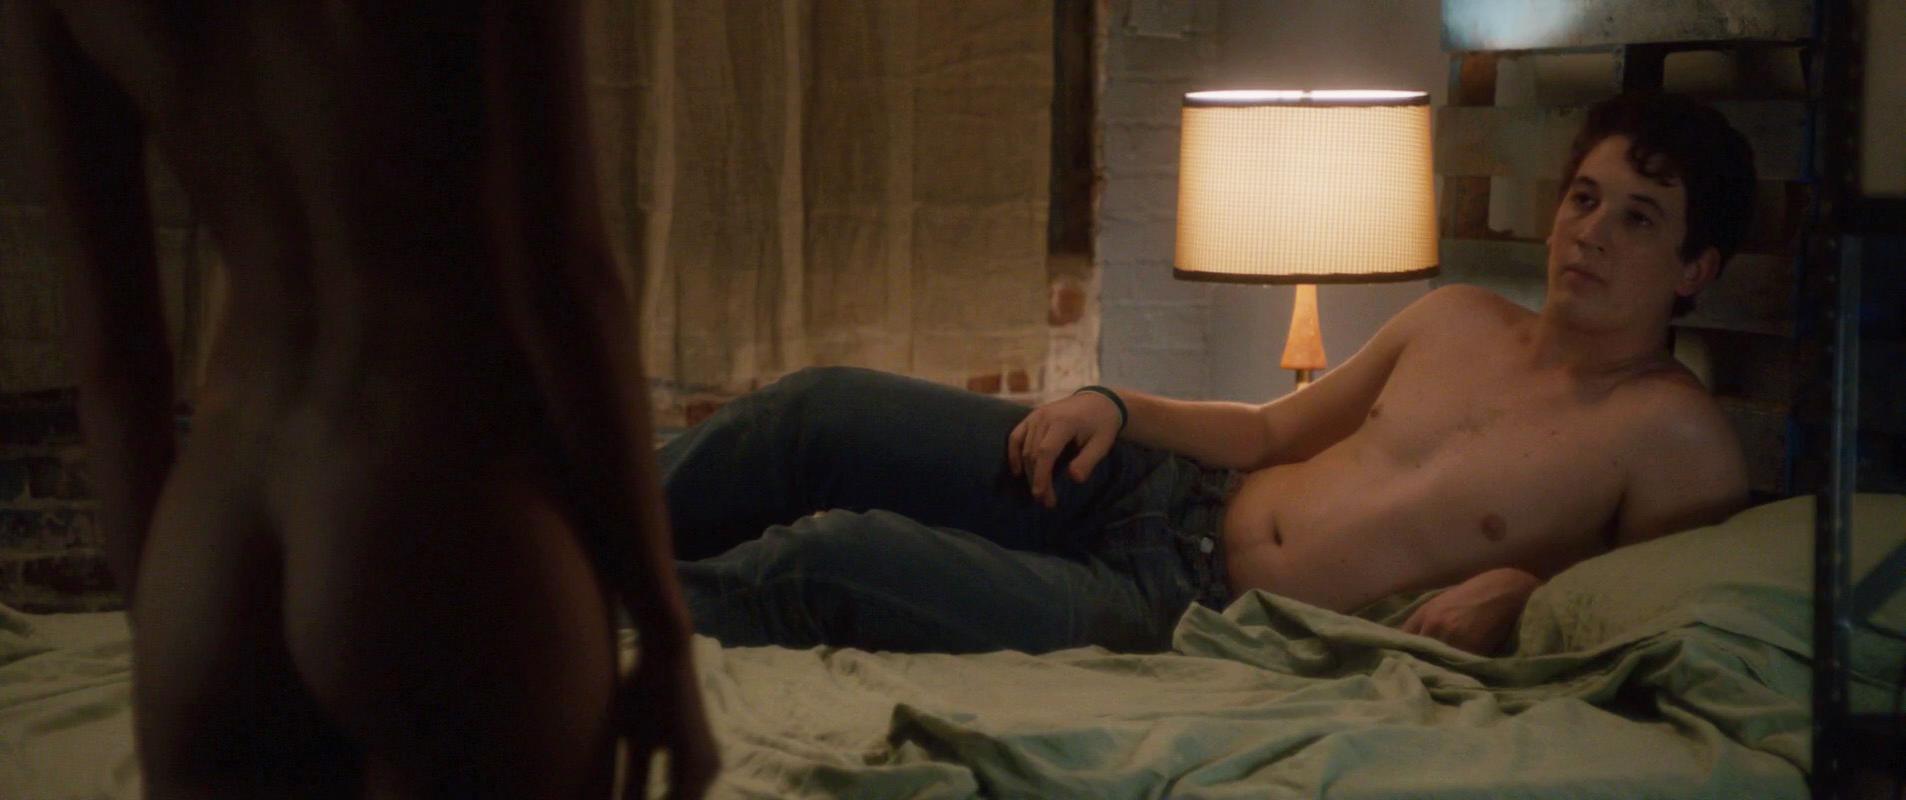 Analeigh Tipton nude - Two Night Stand (2014) .